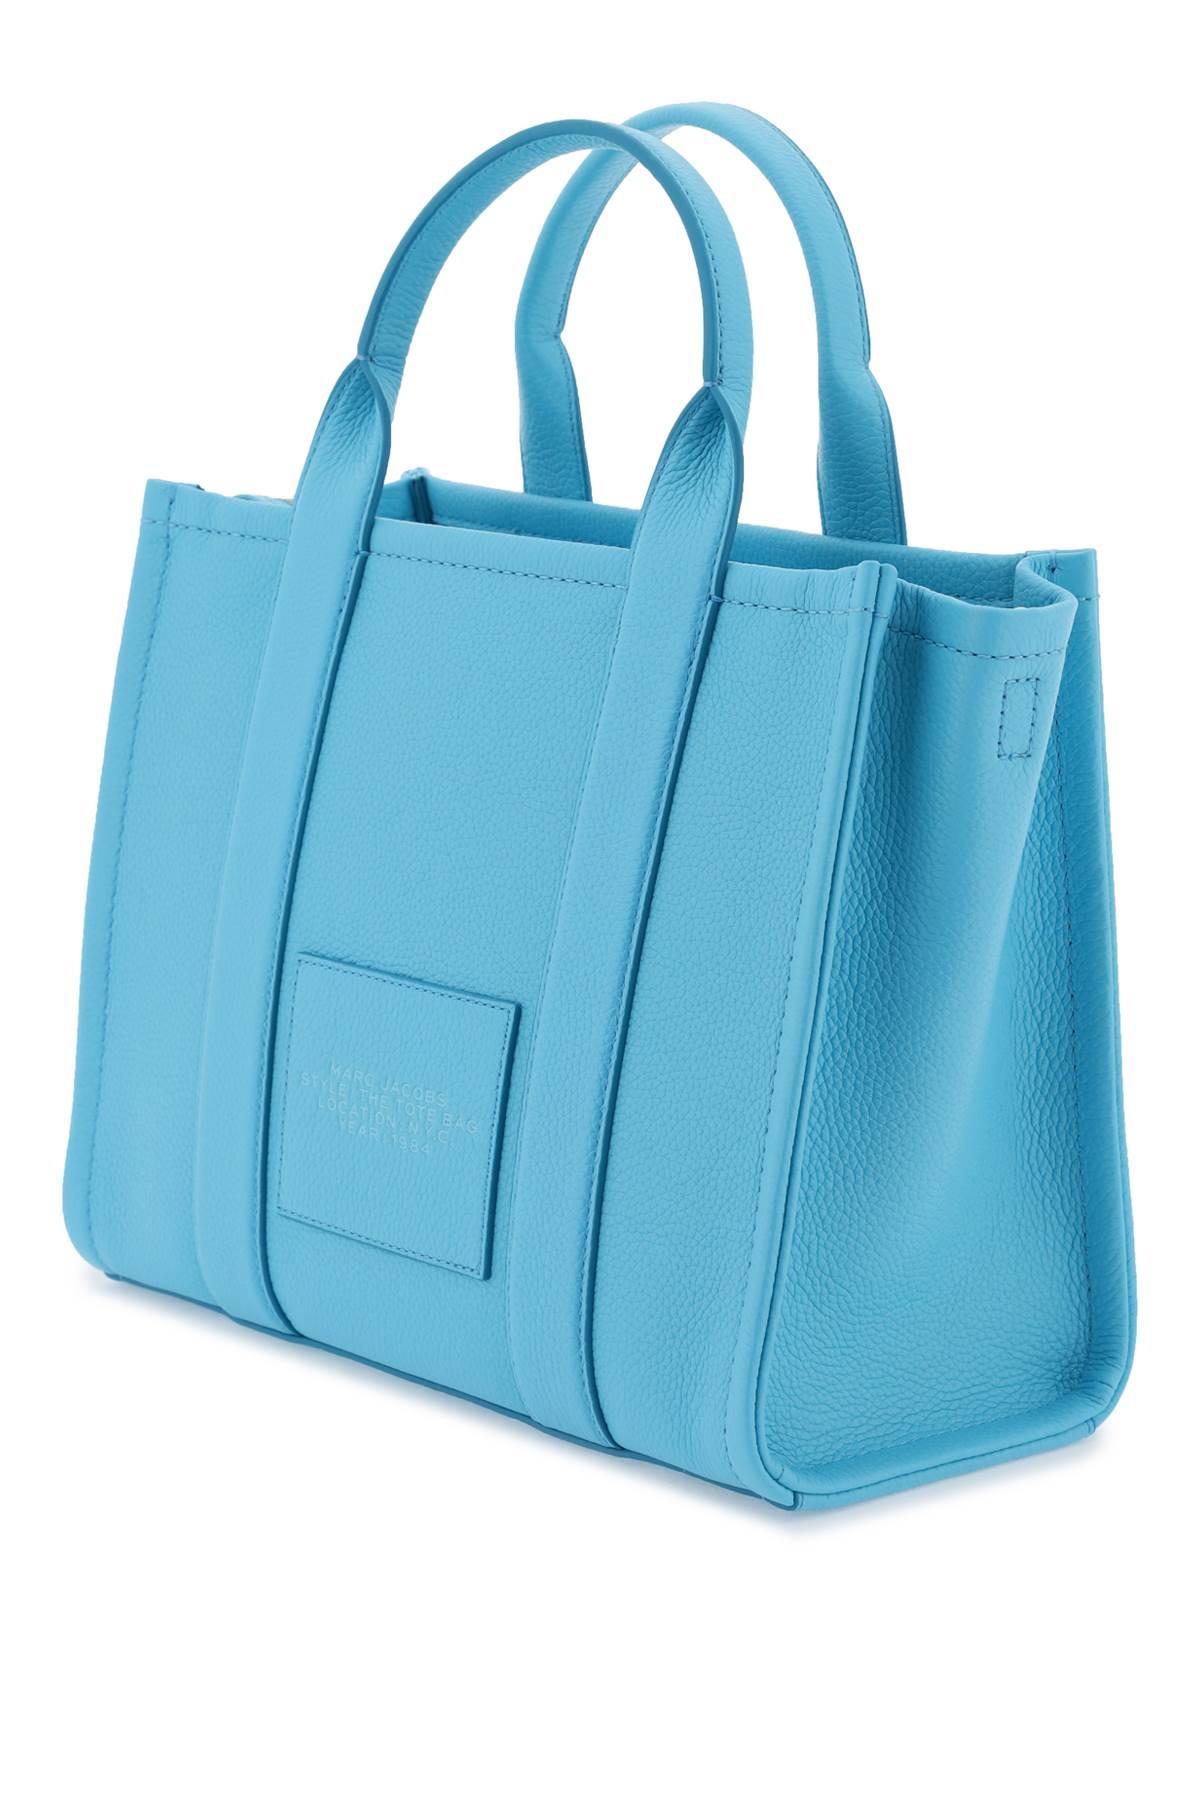 Marc Jacobs The Leather Medium Tote Bag - Blue